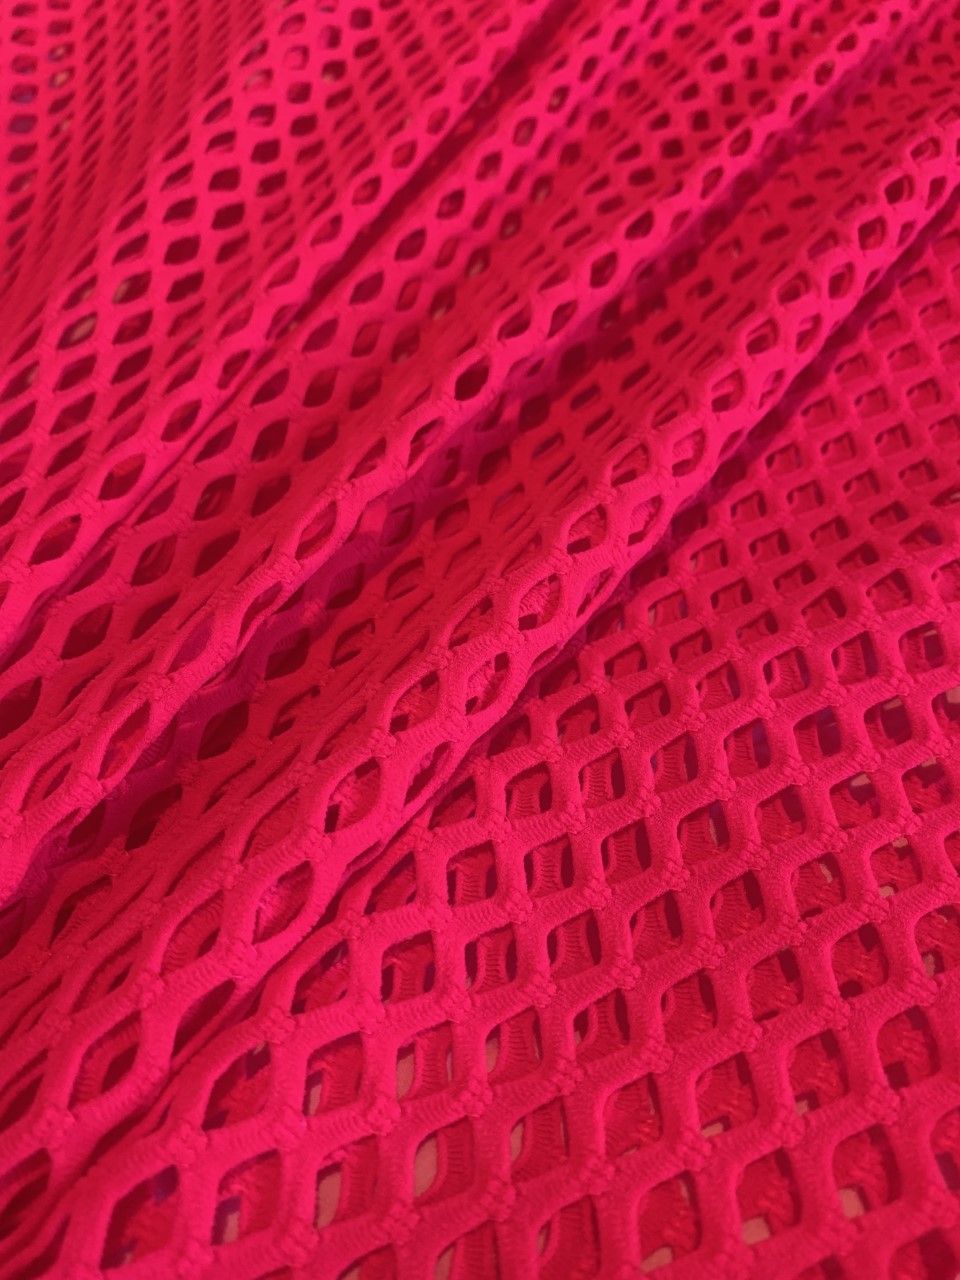 58" Hot Pink Poly Mesh Fabric BTY 75% Poly 17% Nylon 8% Spandex